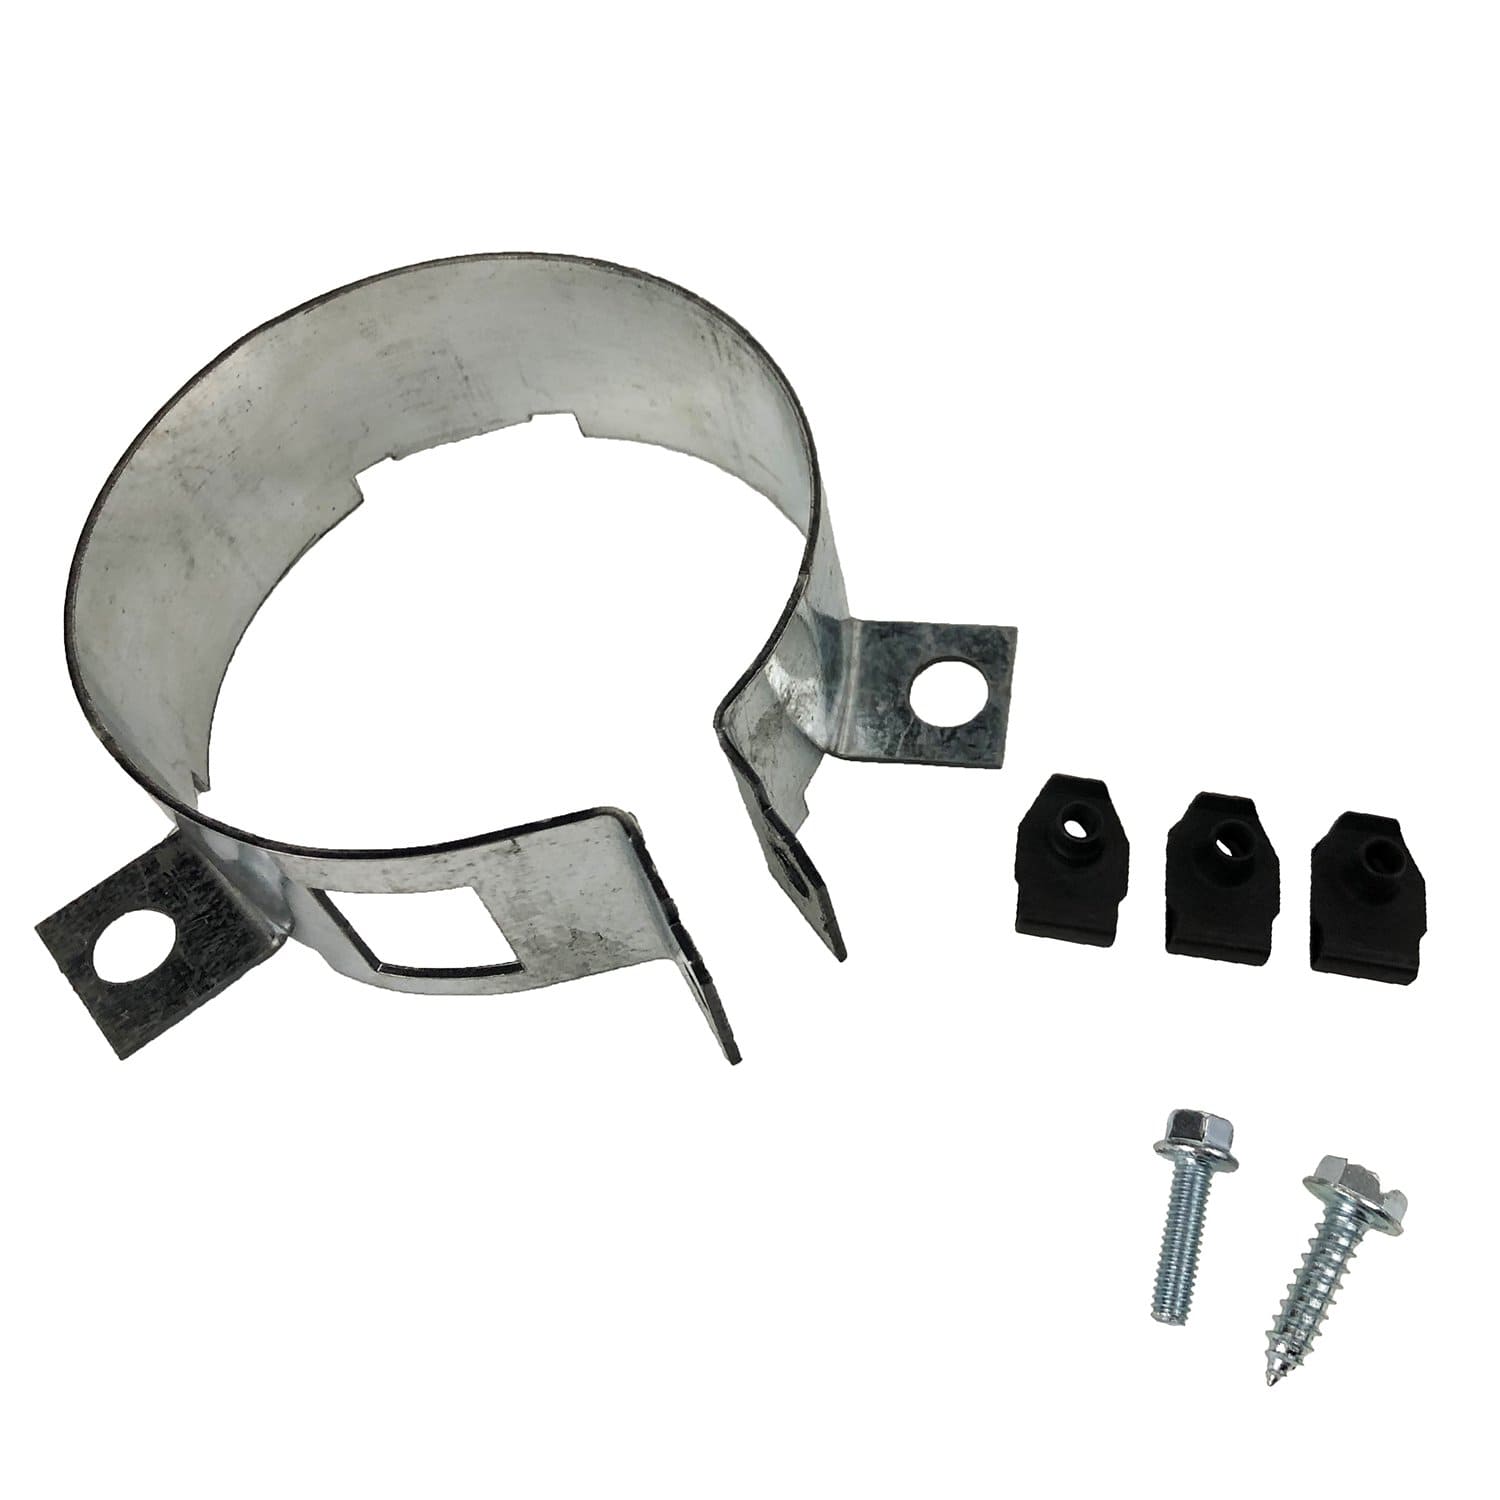 NBK Parts 20270-1K Bracket Kit For Hydro Furnaces 37360 Replaces OEM Part Number 37360